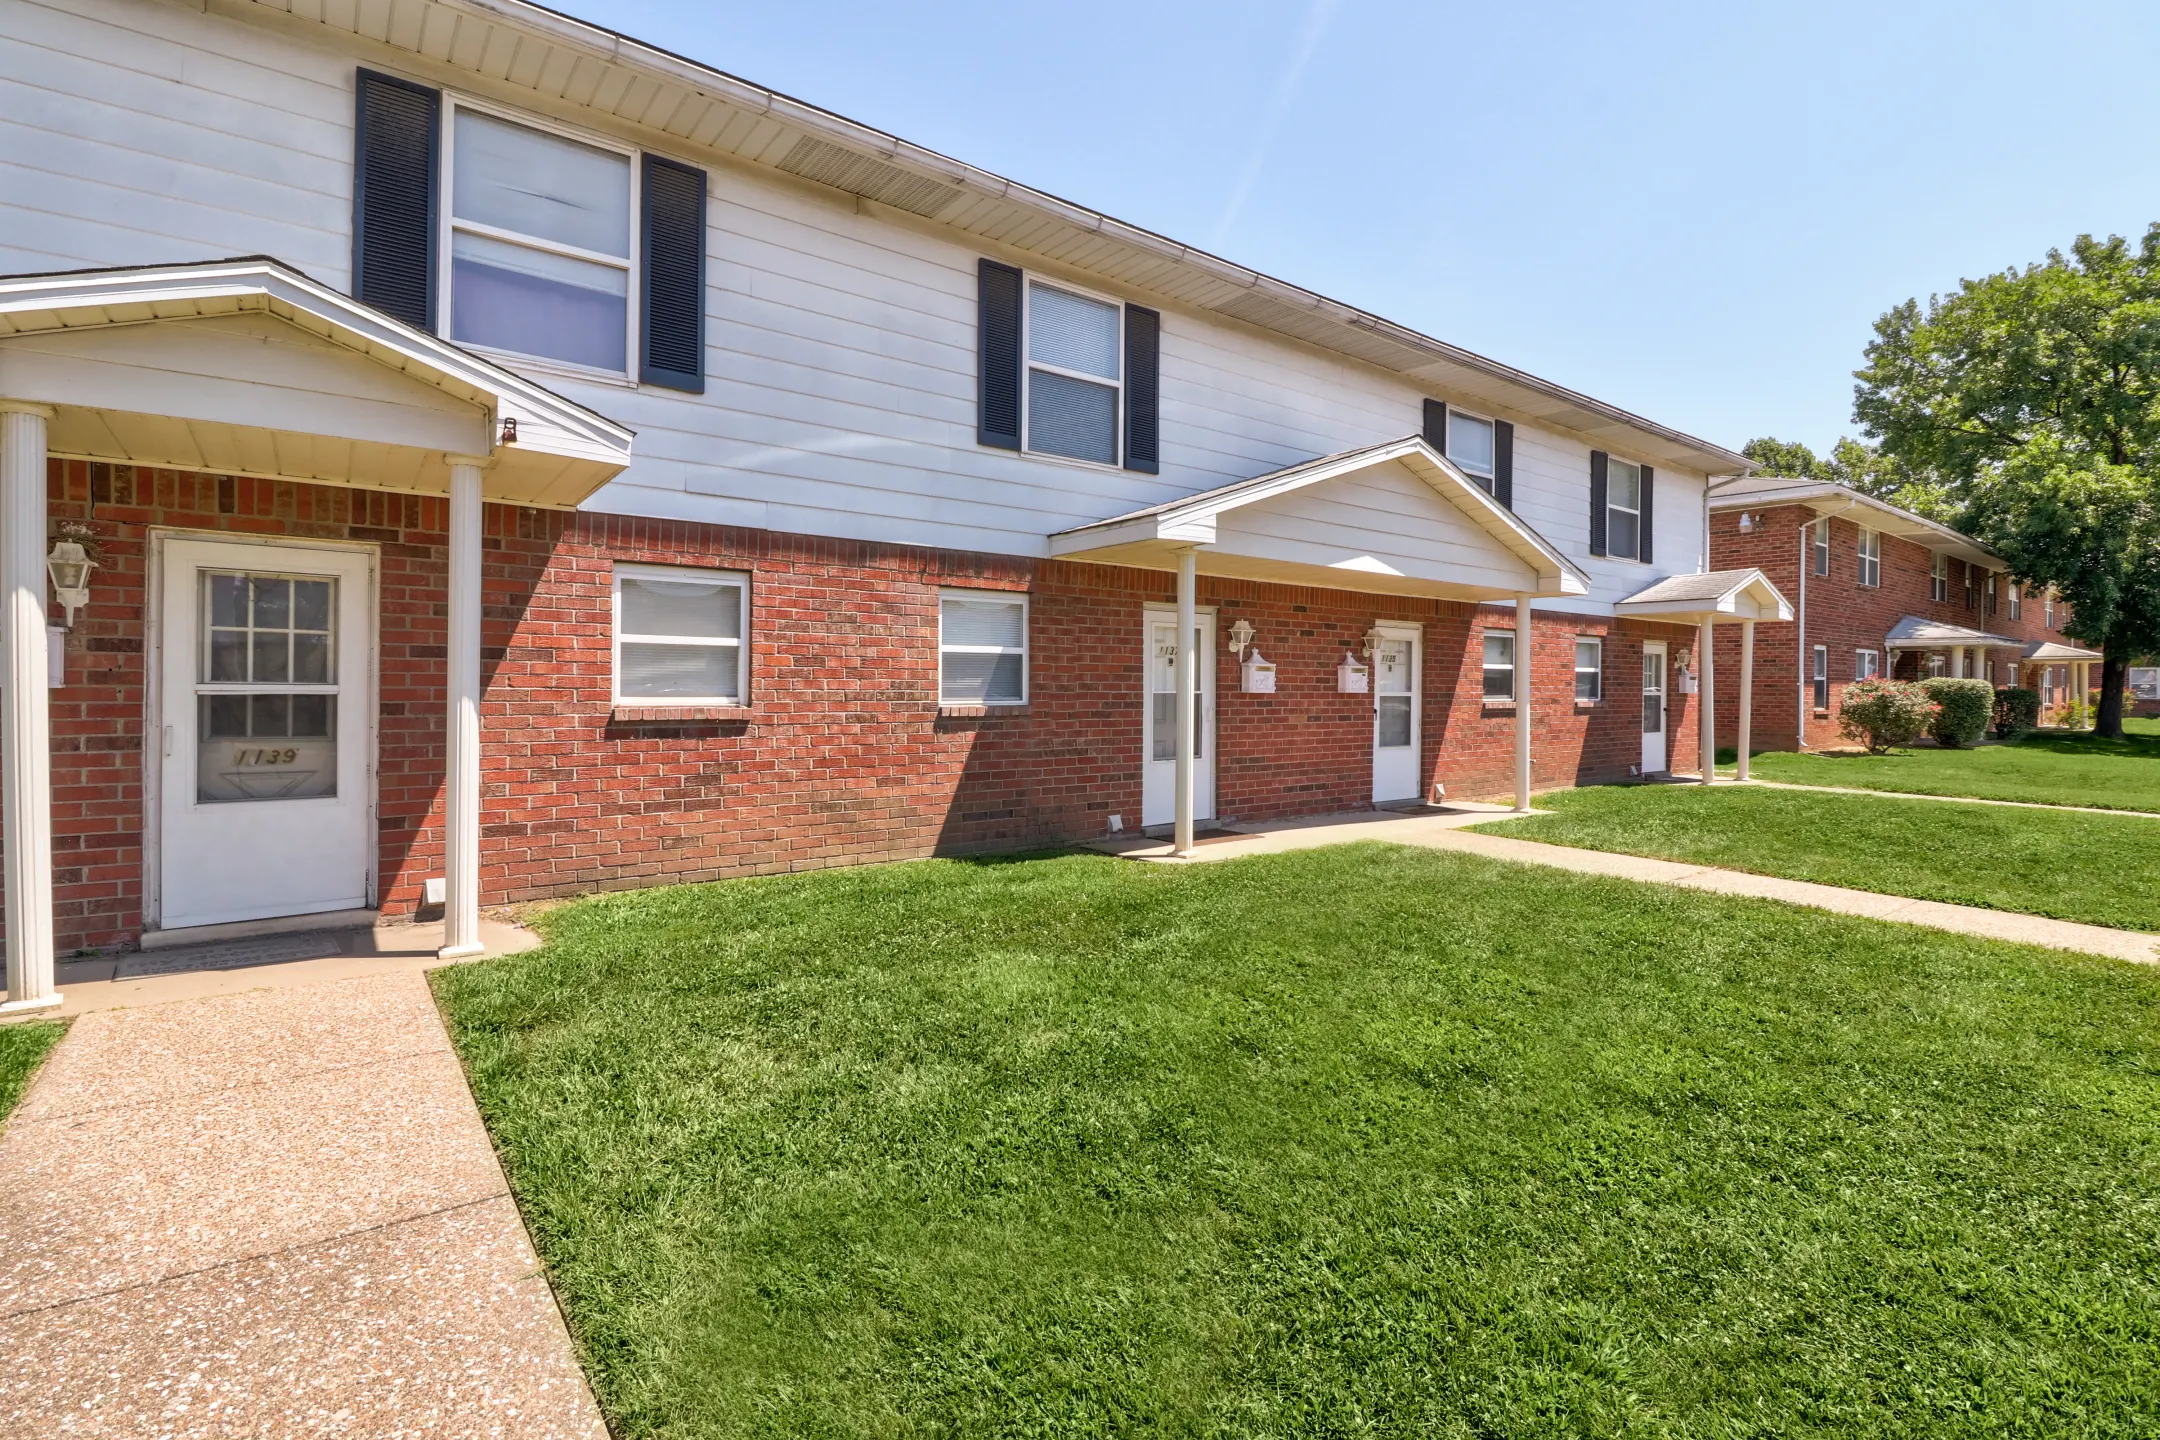 Building - Diamond Valley Apartment Homes - Evansville, IN